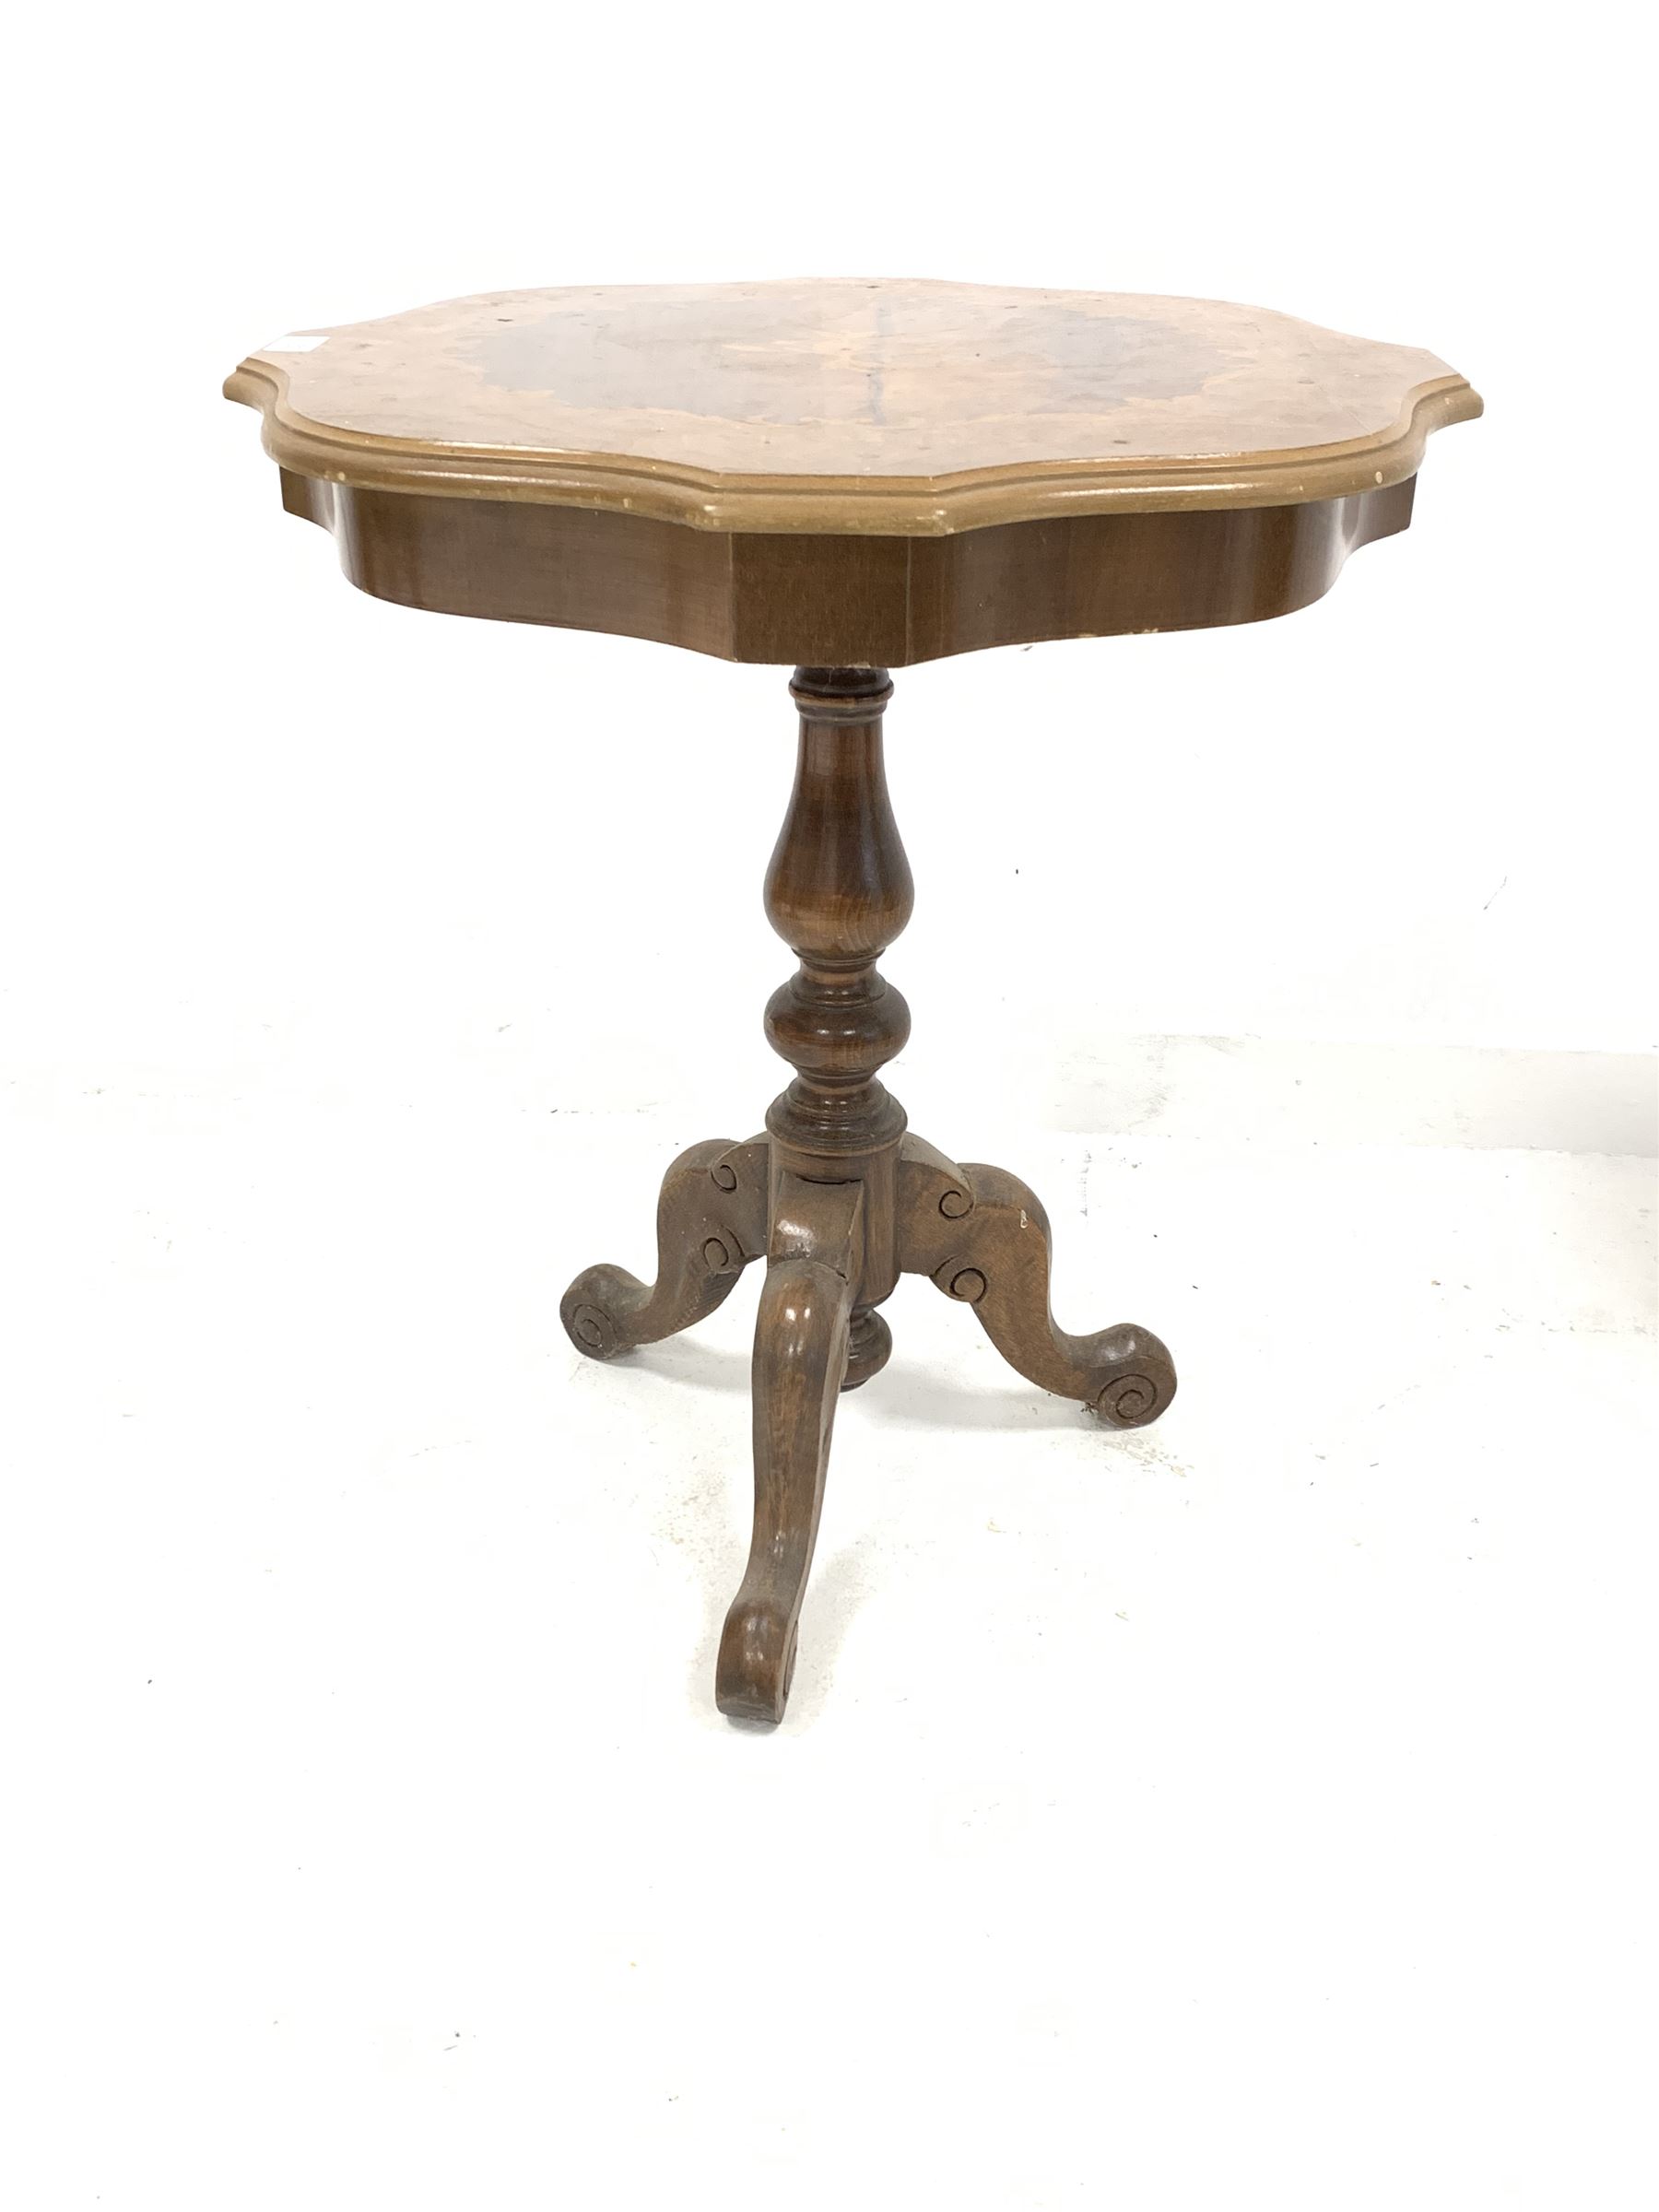 20th century Victorian style inlaid serpentine top occasional table - Image 2 of 2